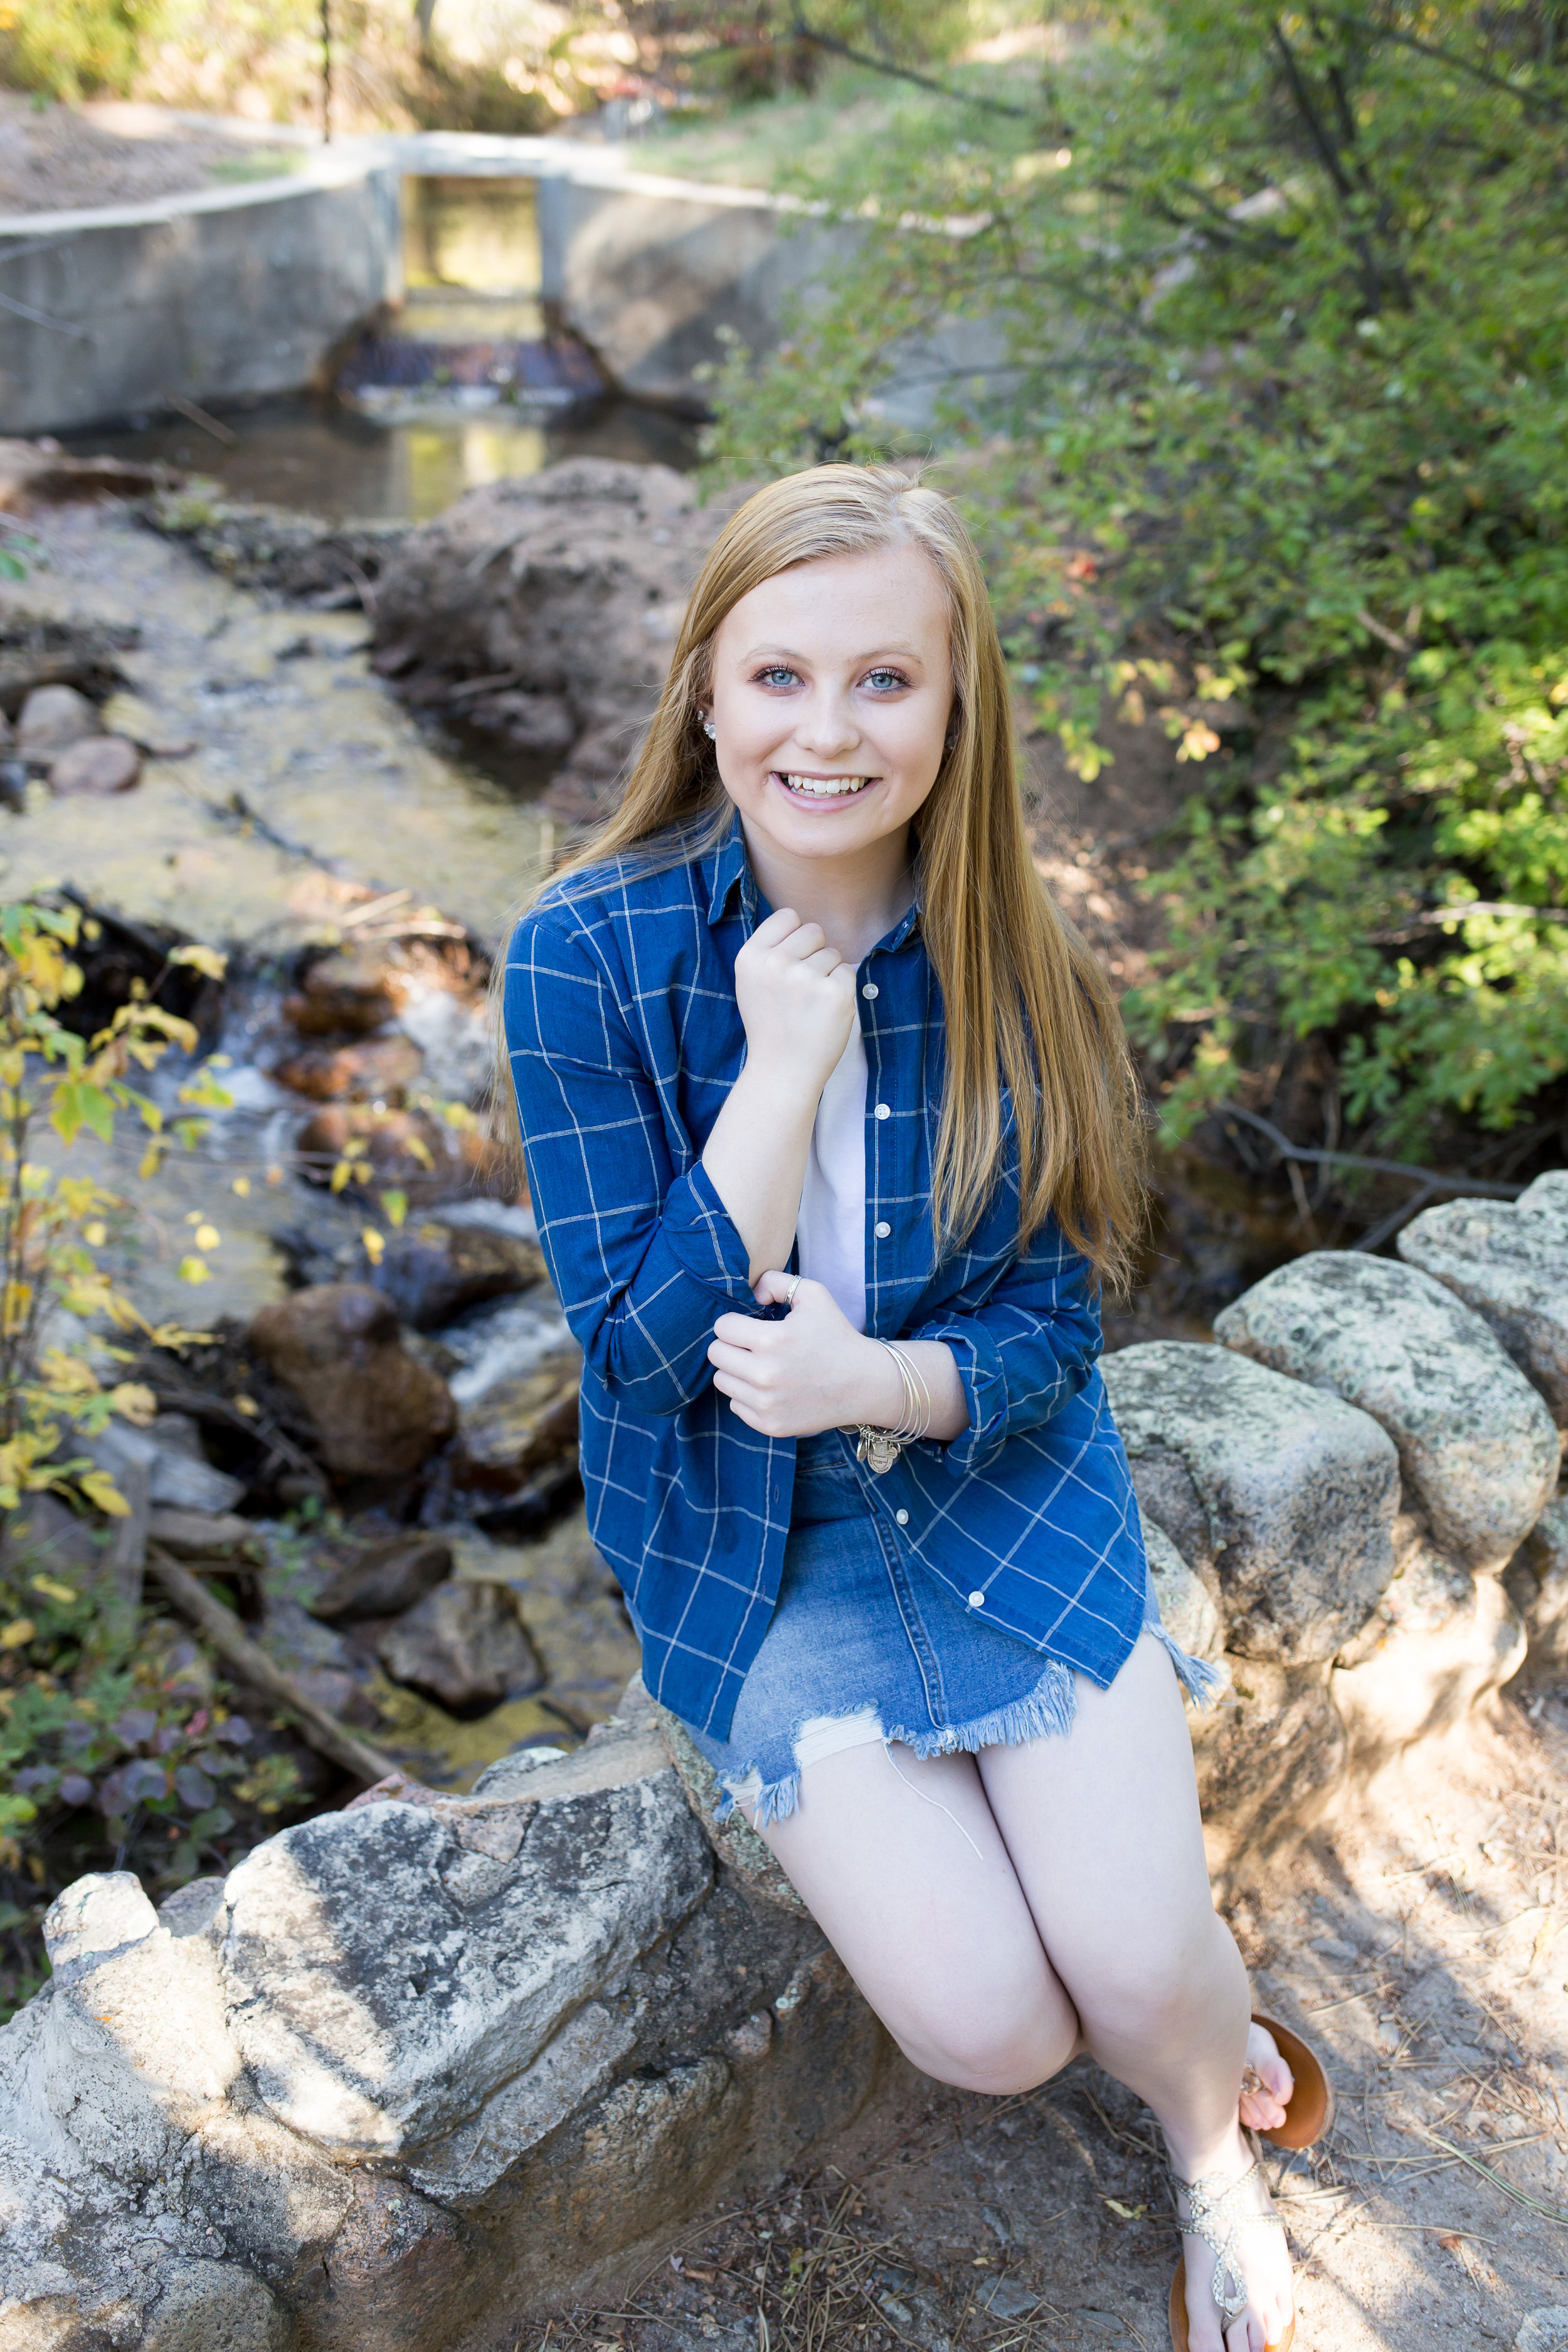 Colorado Springs Senior Photographer | Stacy Carosa Photography | Colorado Springs senior session  in Cheyenne Canyon among trees and water | Colorado Springs Senior Photographer